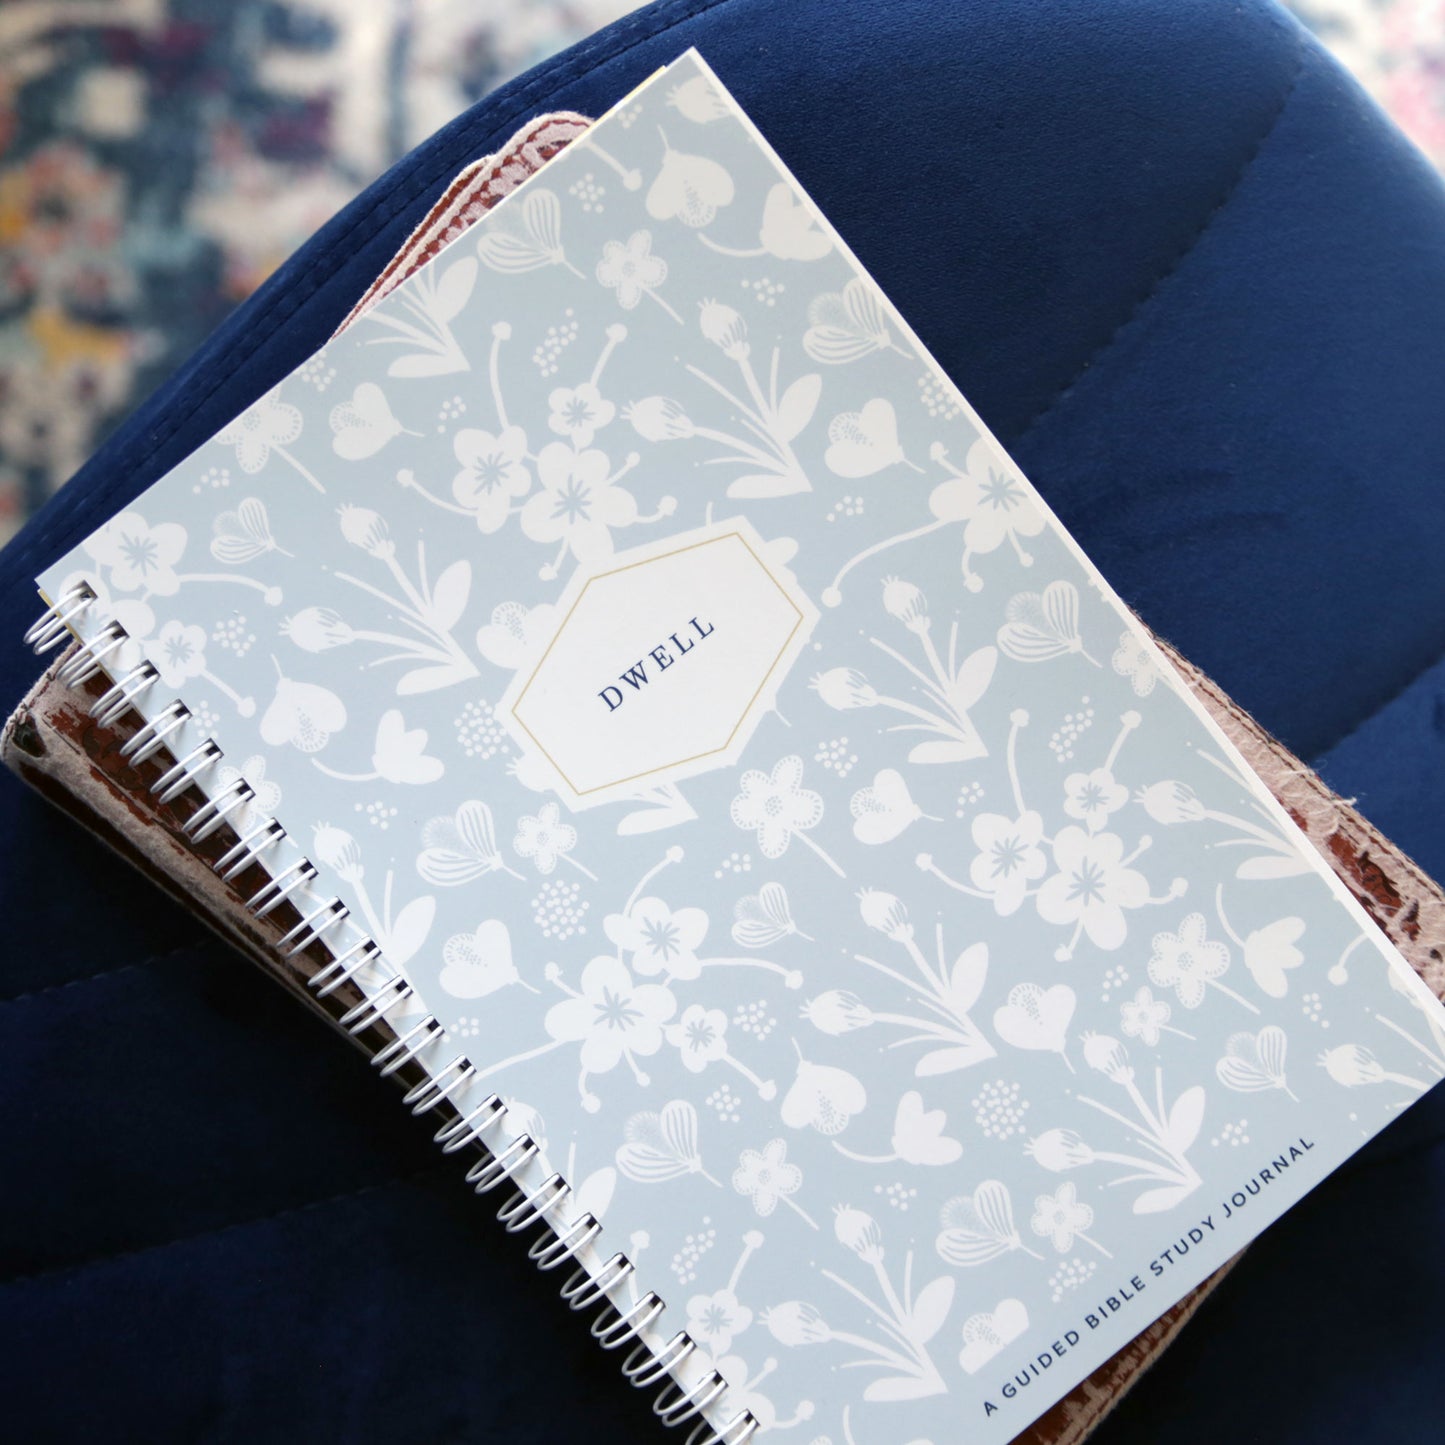 Dwell Bible Study Journal, French Floral